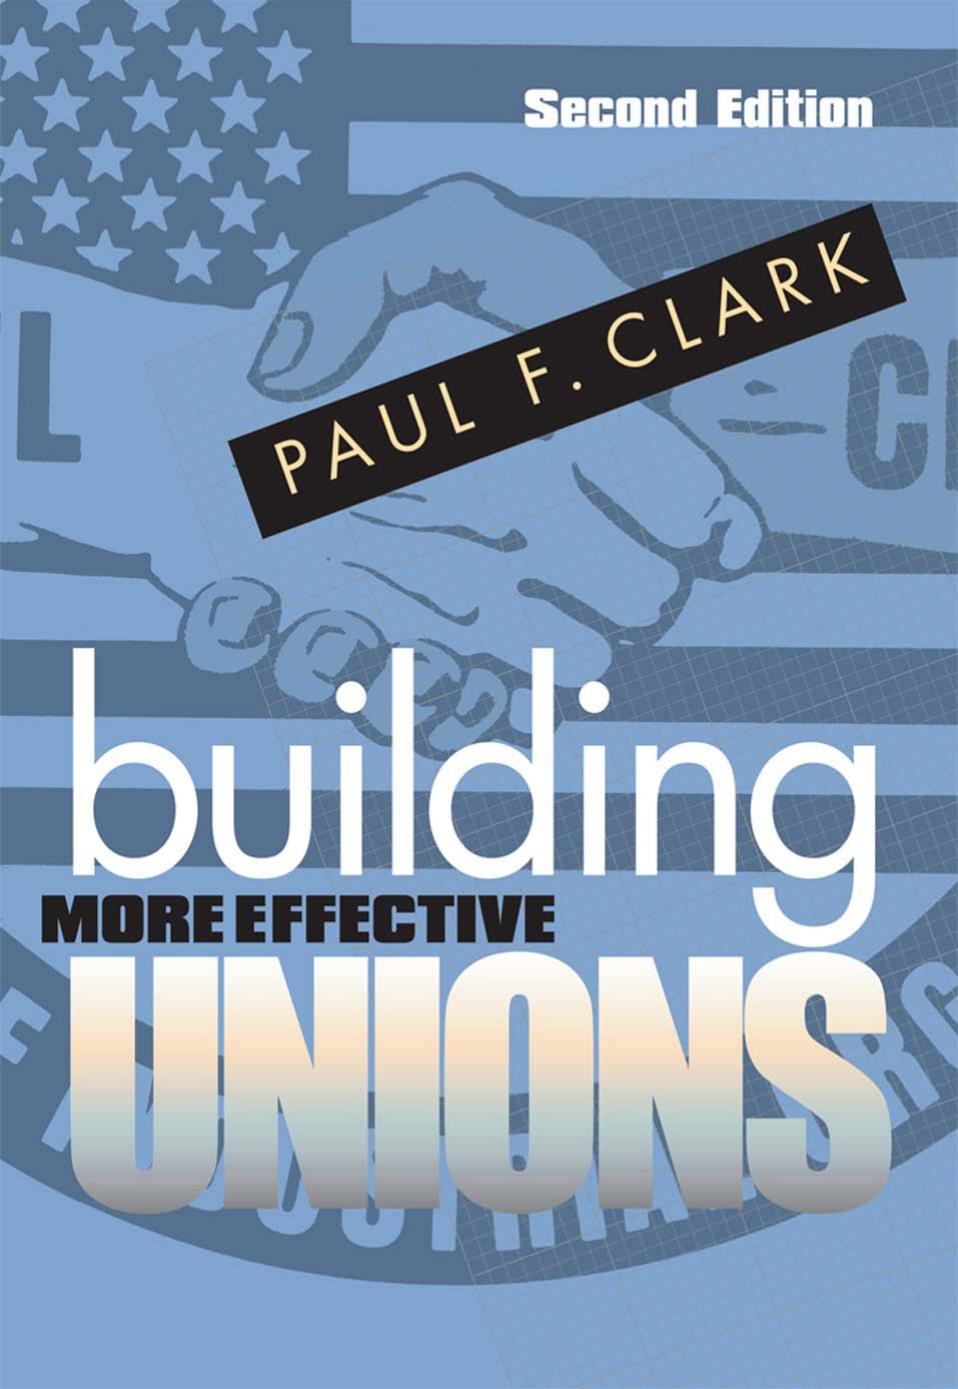 Building More Effective Unions by by Paul F. Clark